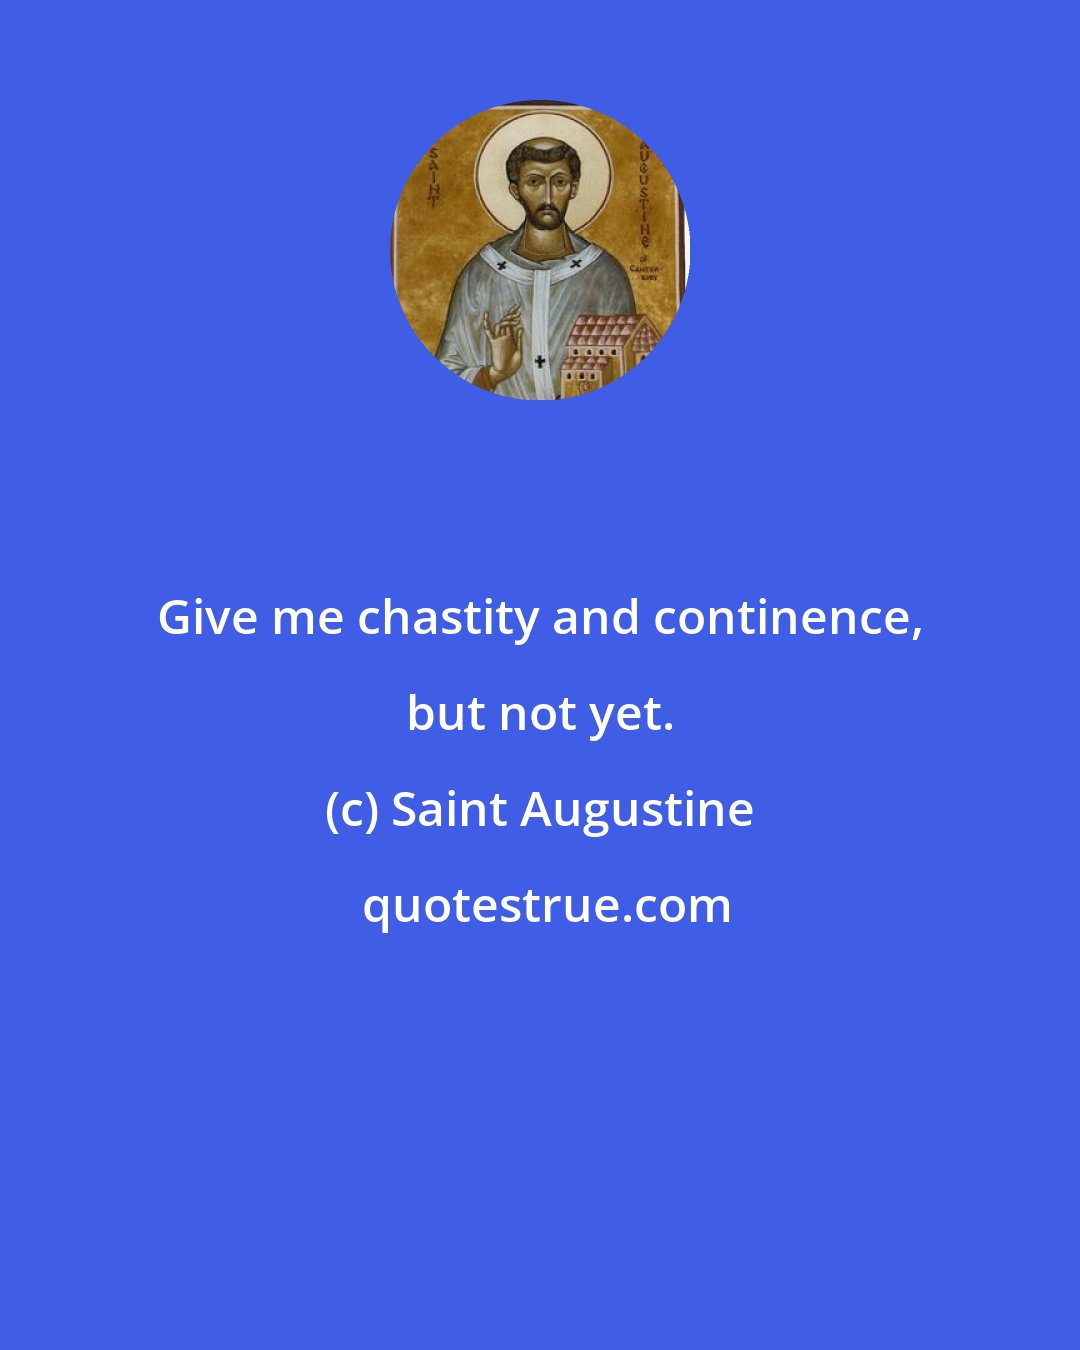 Saint Augustine: Give me chastity and continence, but not yet.